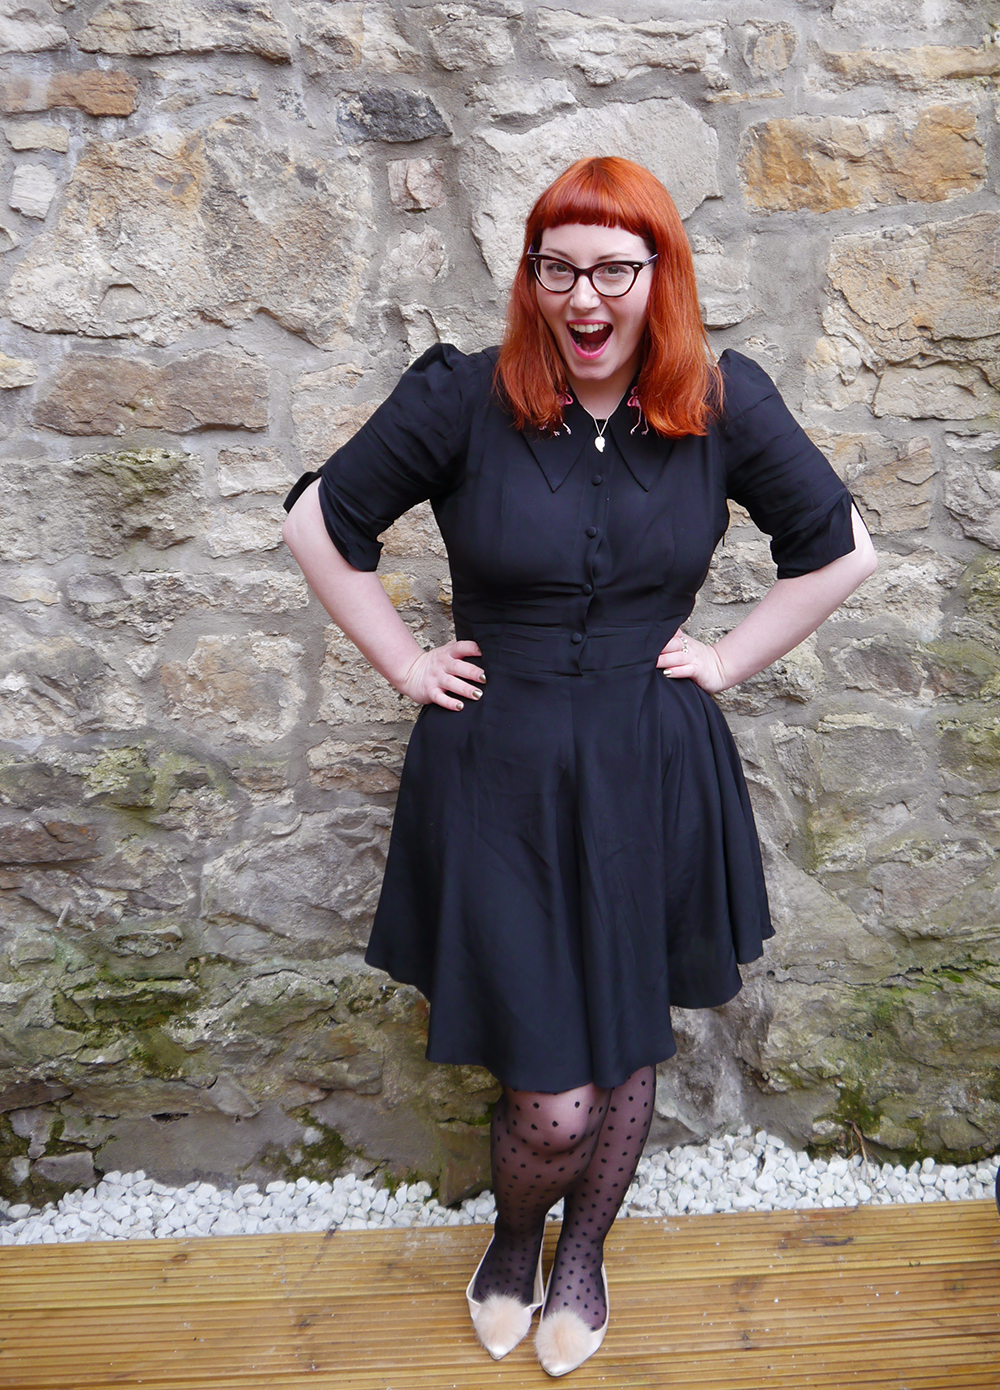 Edinburgh, Scottish bloggers, Metropolitain Fashion Show, Blogger awards, Coco Fennel flamingo dress, Best Witches necklace from Cheap Frills, ASOS pink pom pom shoes, polka dot tights, red head, ginger hair